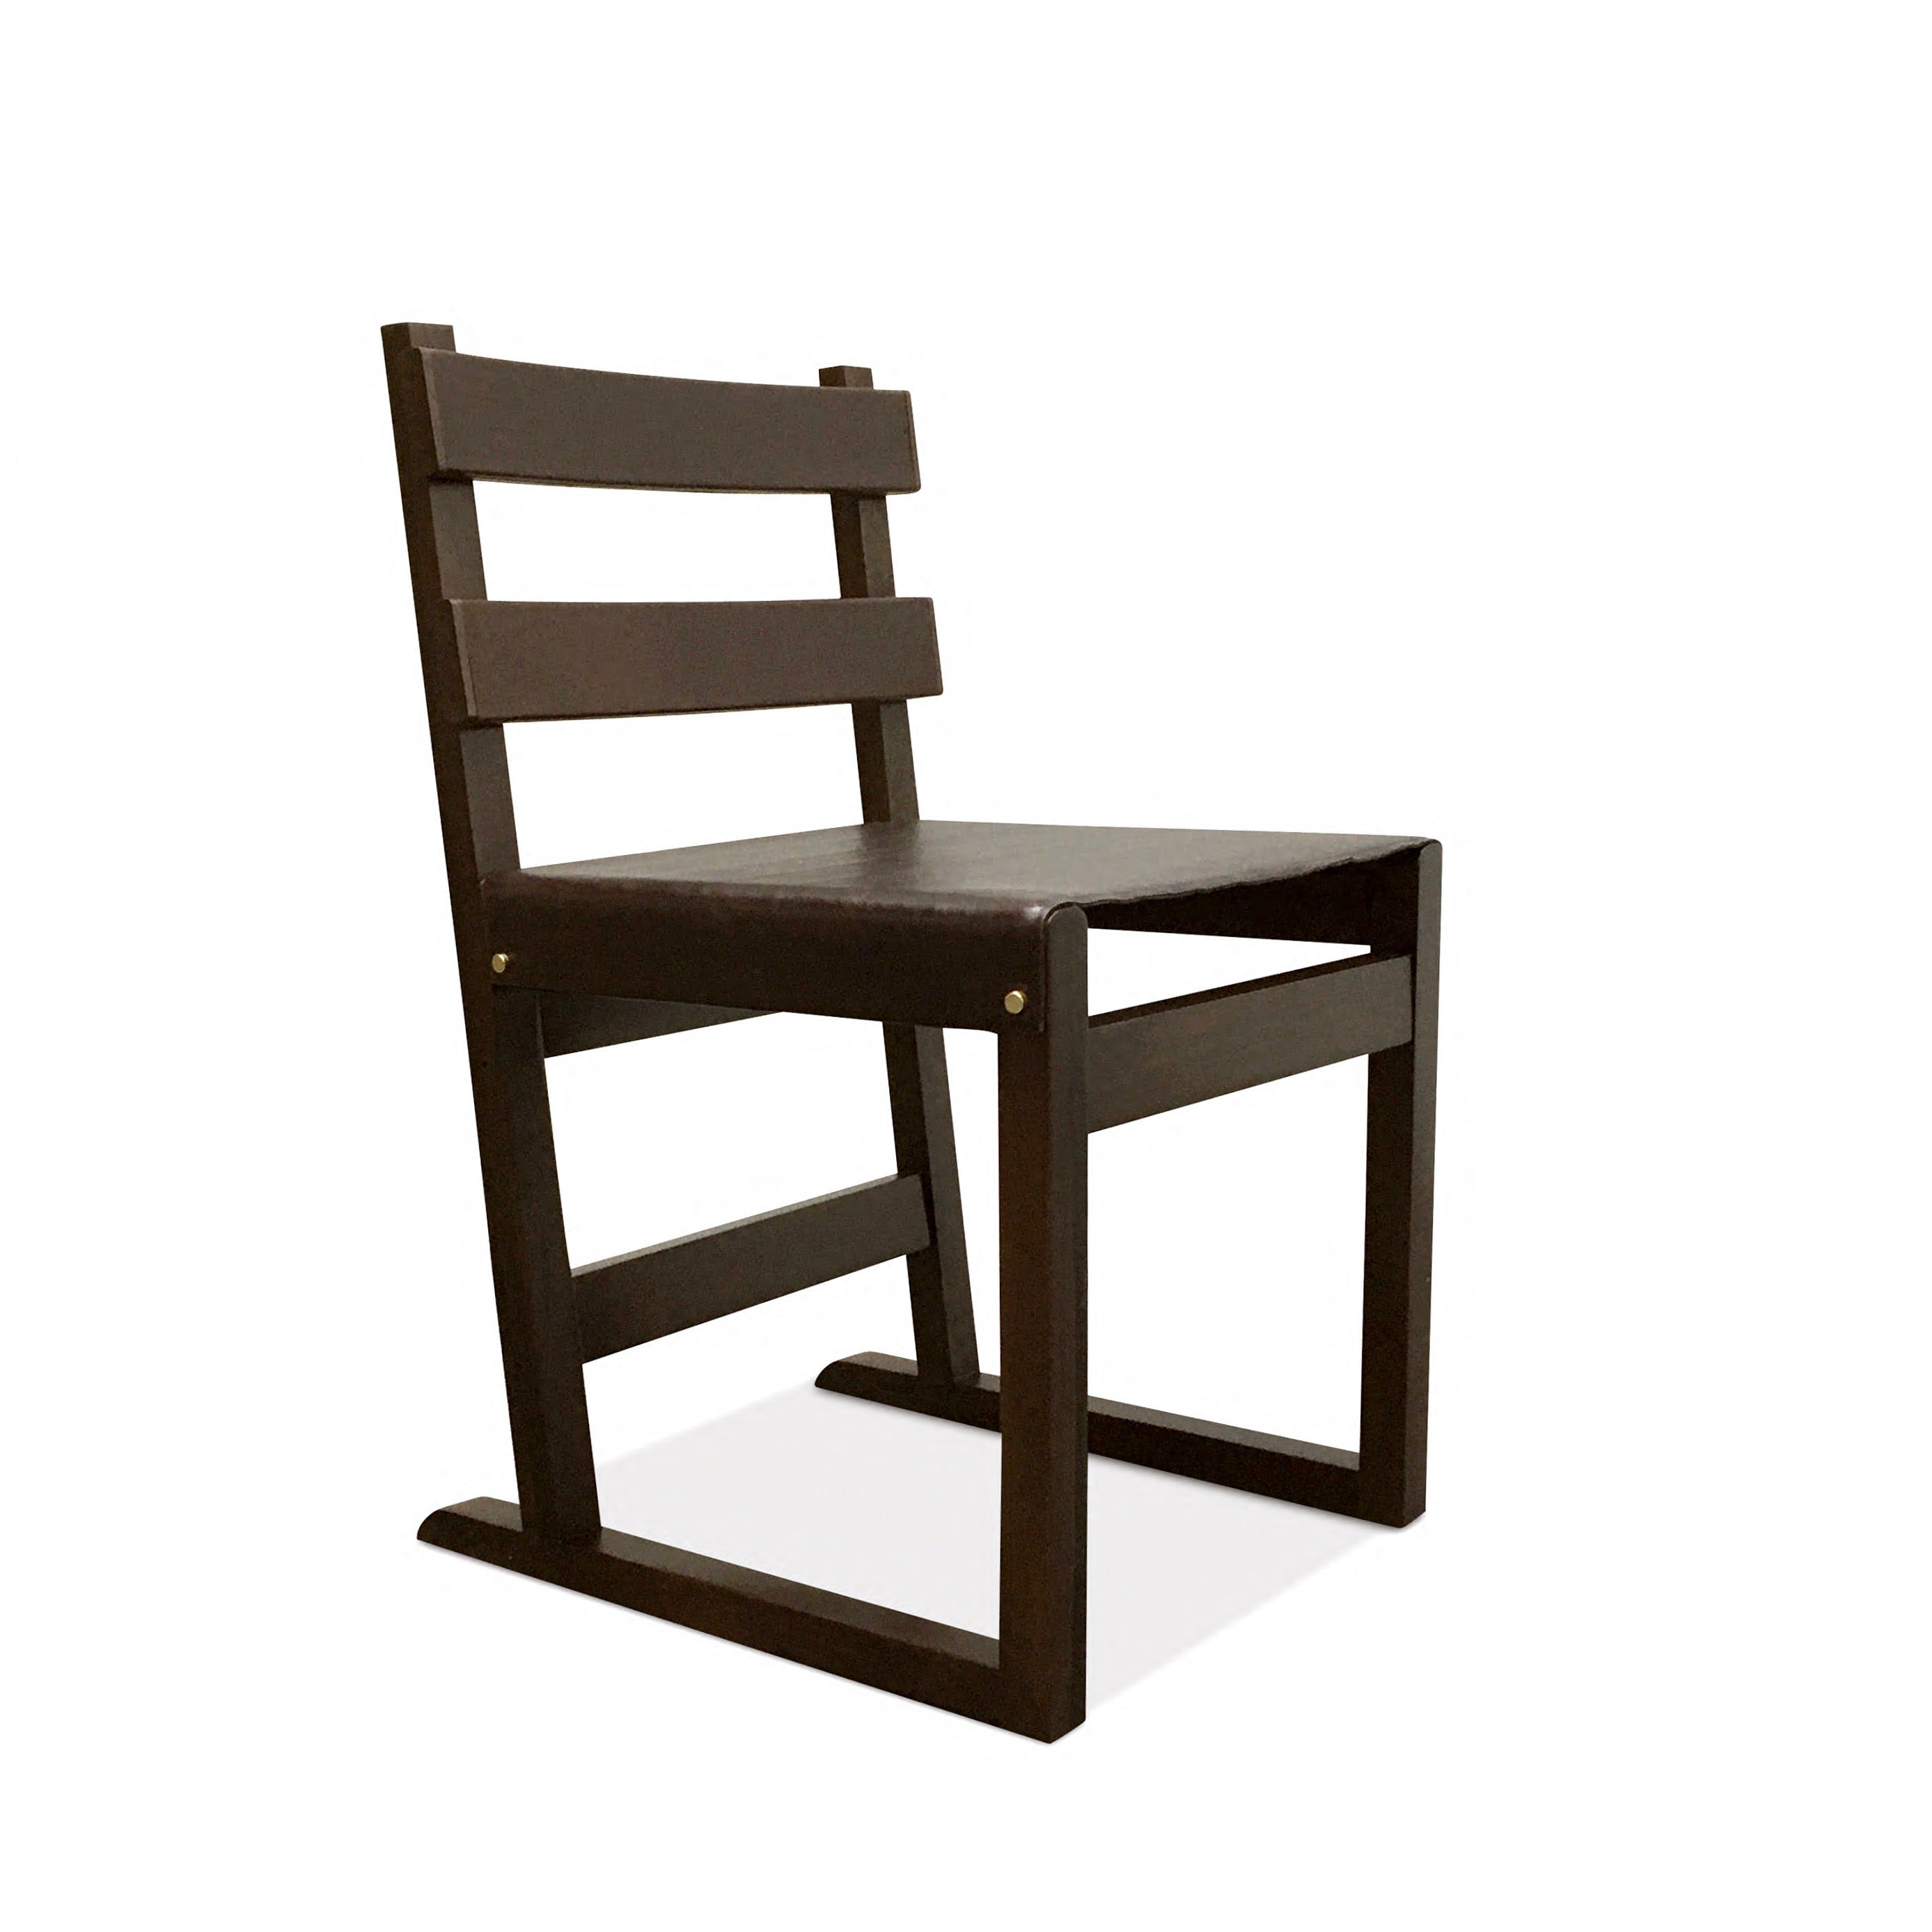 Slung and Wrapped Leather Slatted-Back Chair from Costantini, Piero (In Stock) For Sale